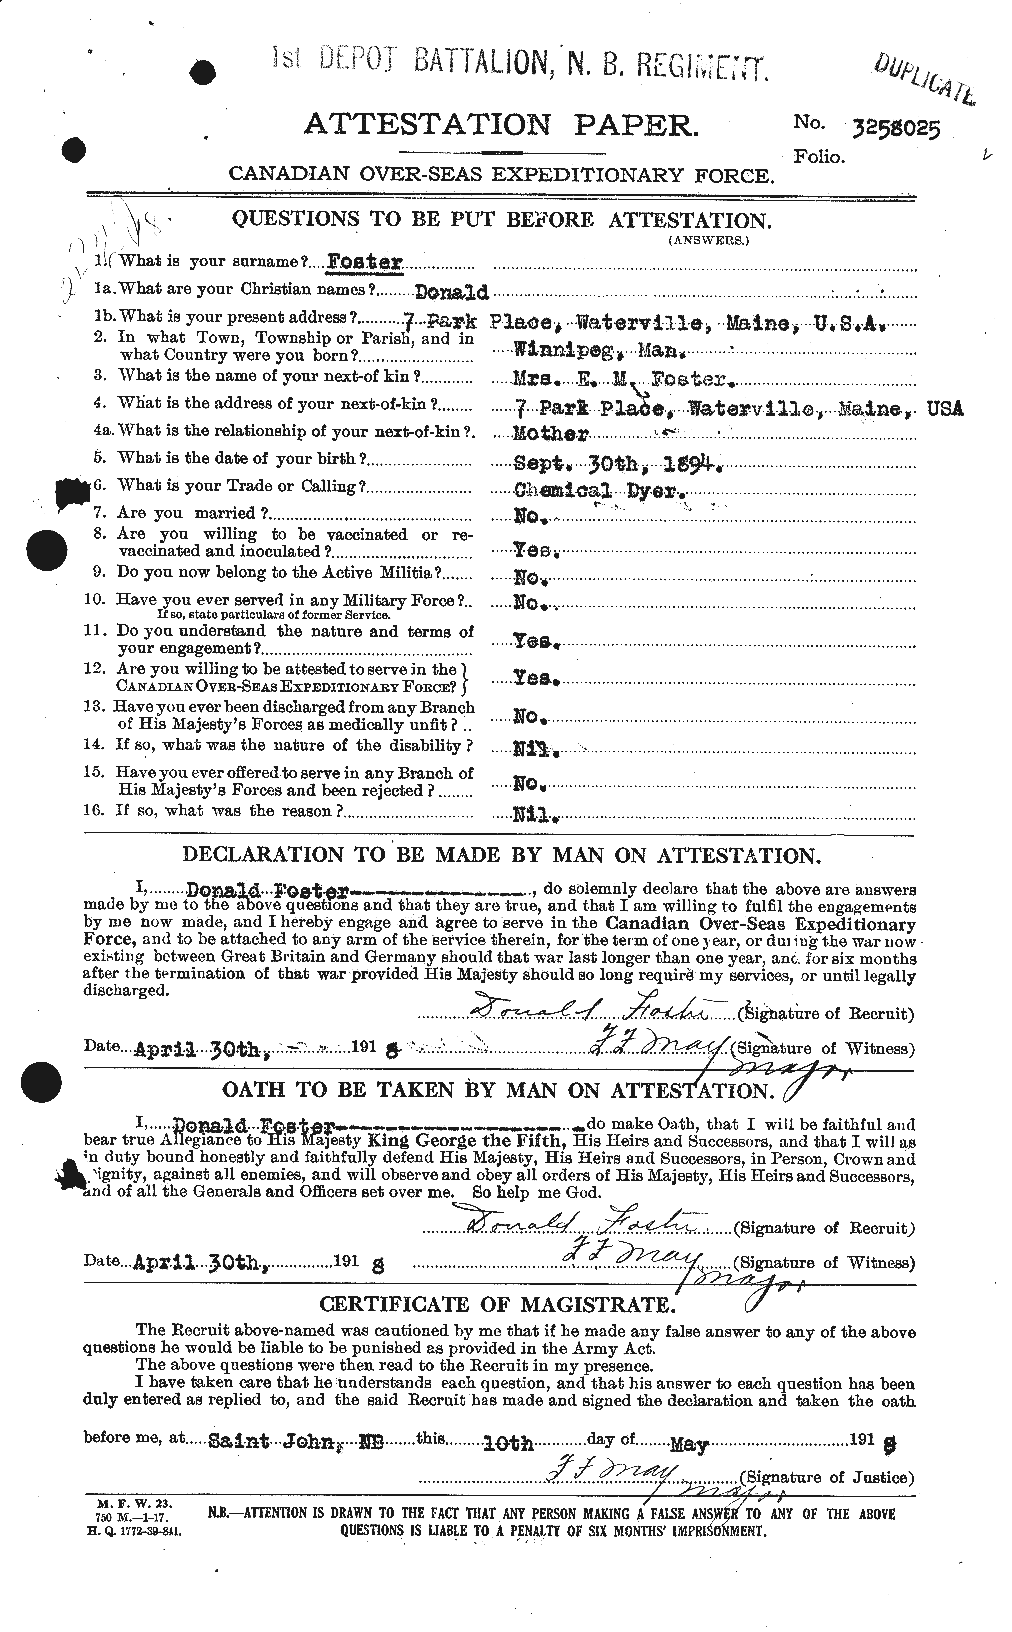 Personnel Records of the First World War - CEF 330562a